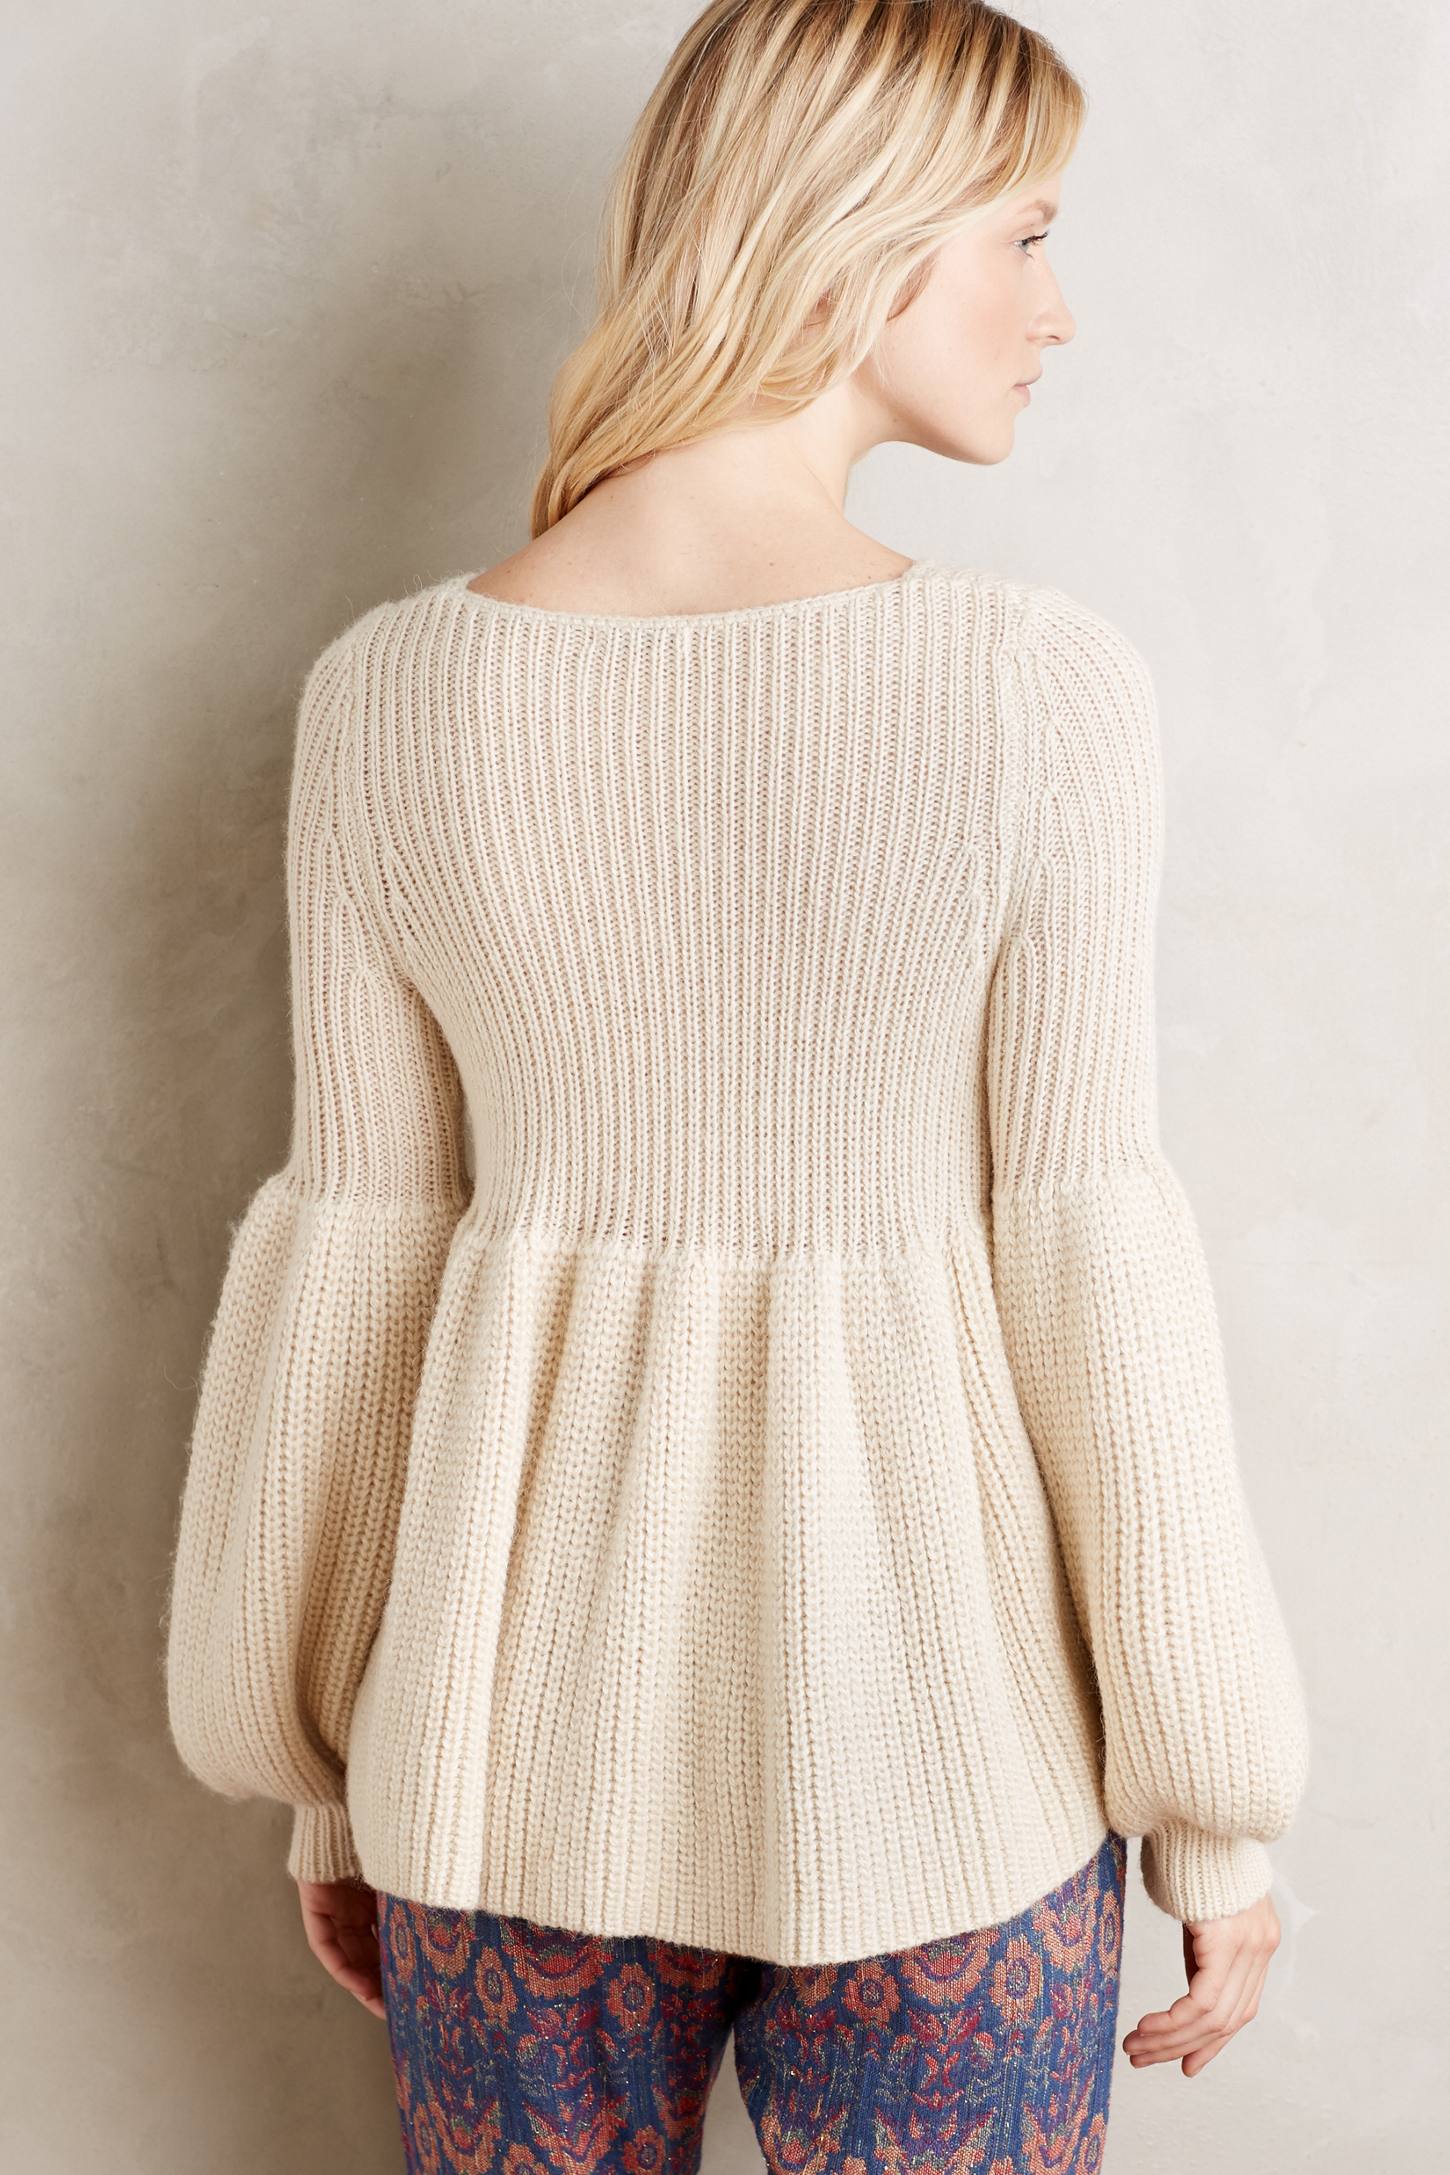 Tenney Pullover